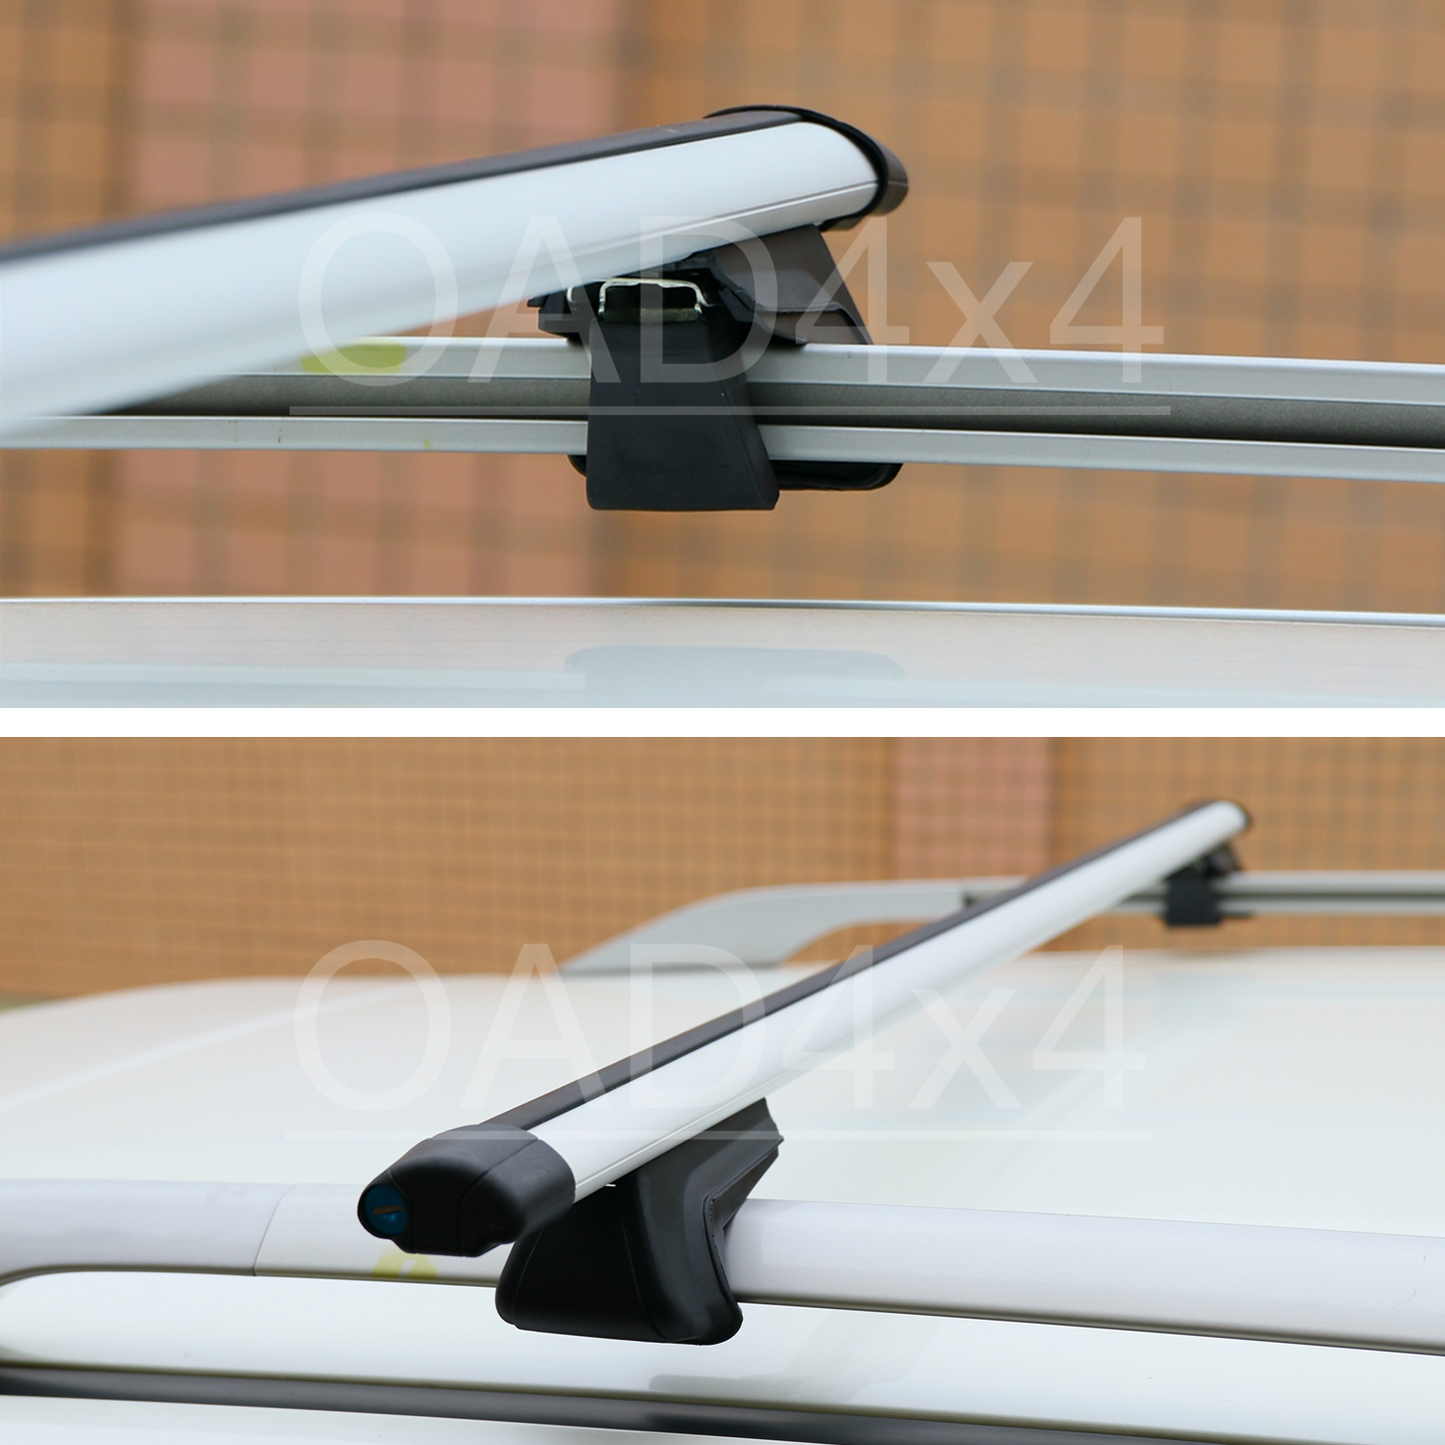 1 Pair Aluminum Silver Cross Bar Roof Racks Baggage holder for Subaru Forester 2008+ with raised roof rail